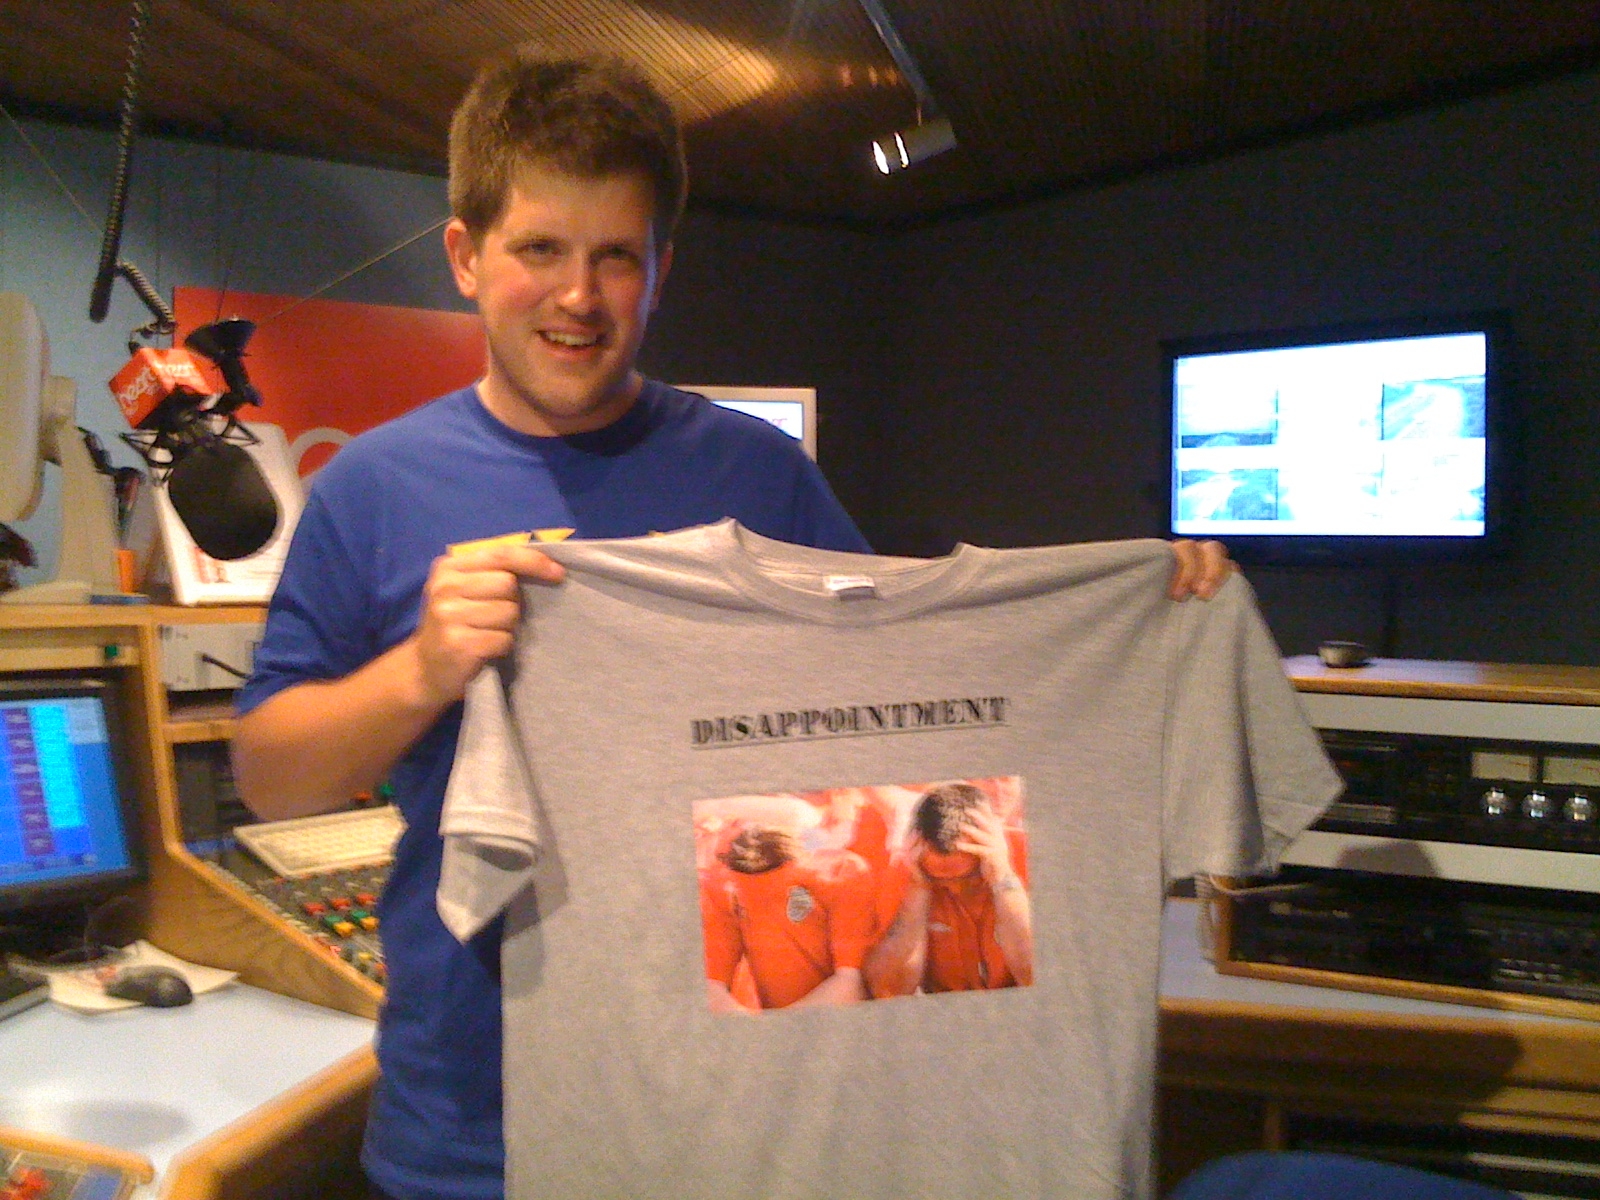 Dan's 'Disappointment' T-Shirt